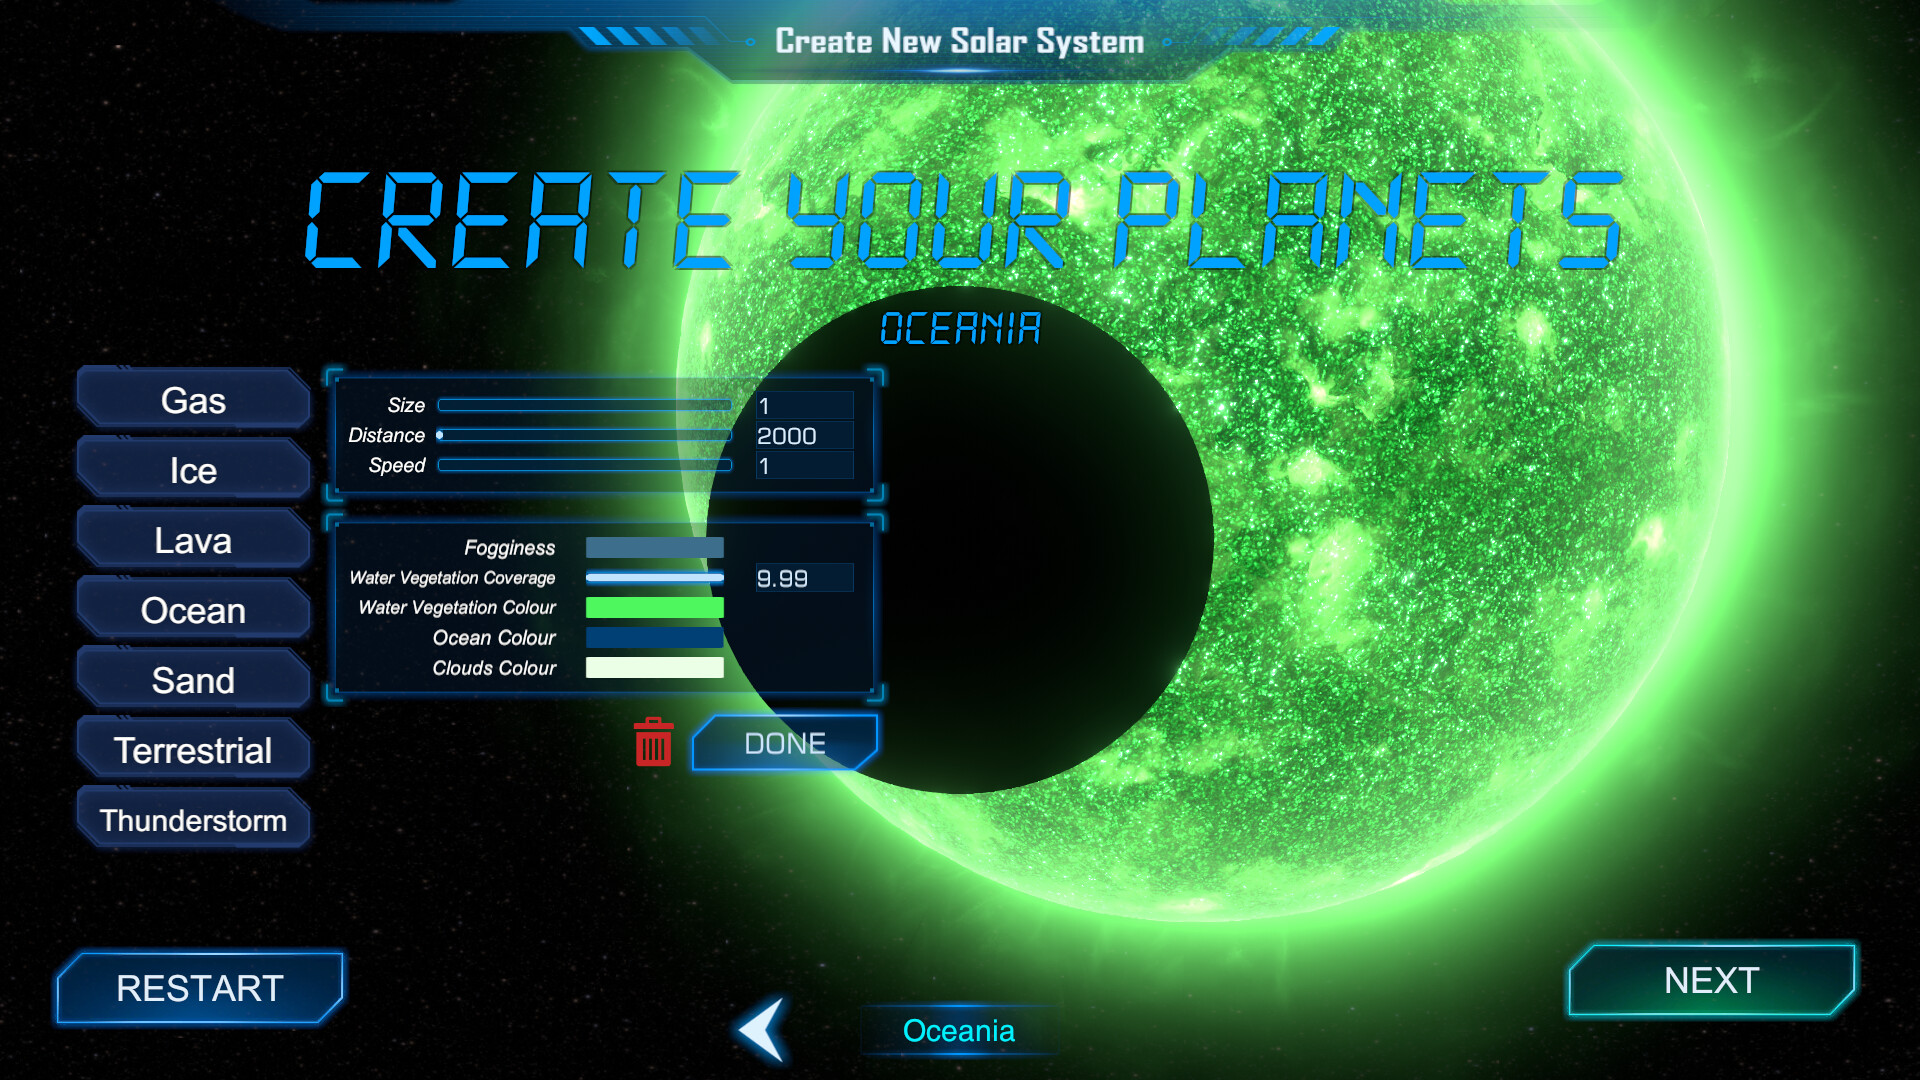 Solar Systems For Kids on Steam